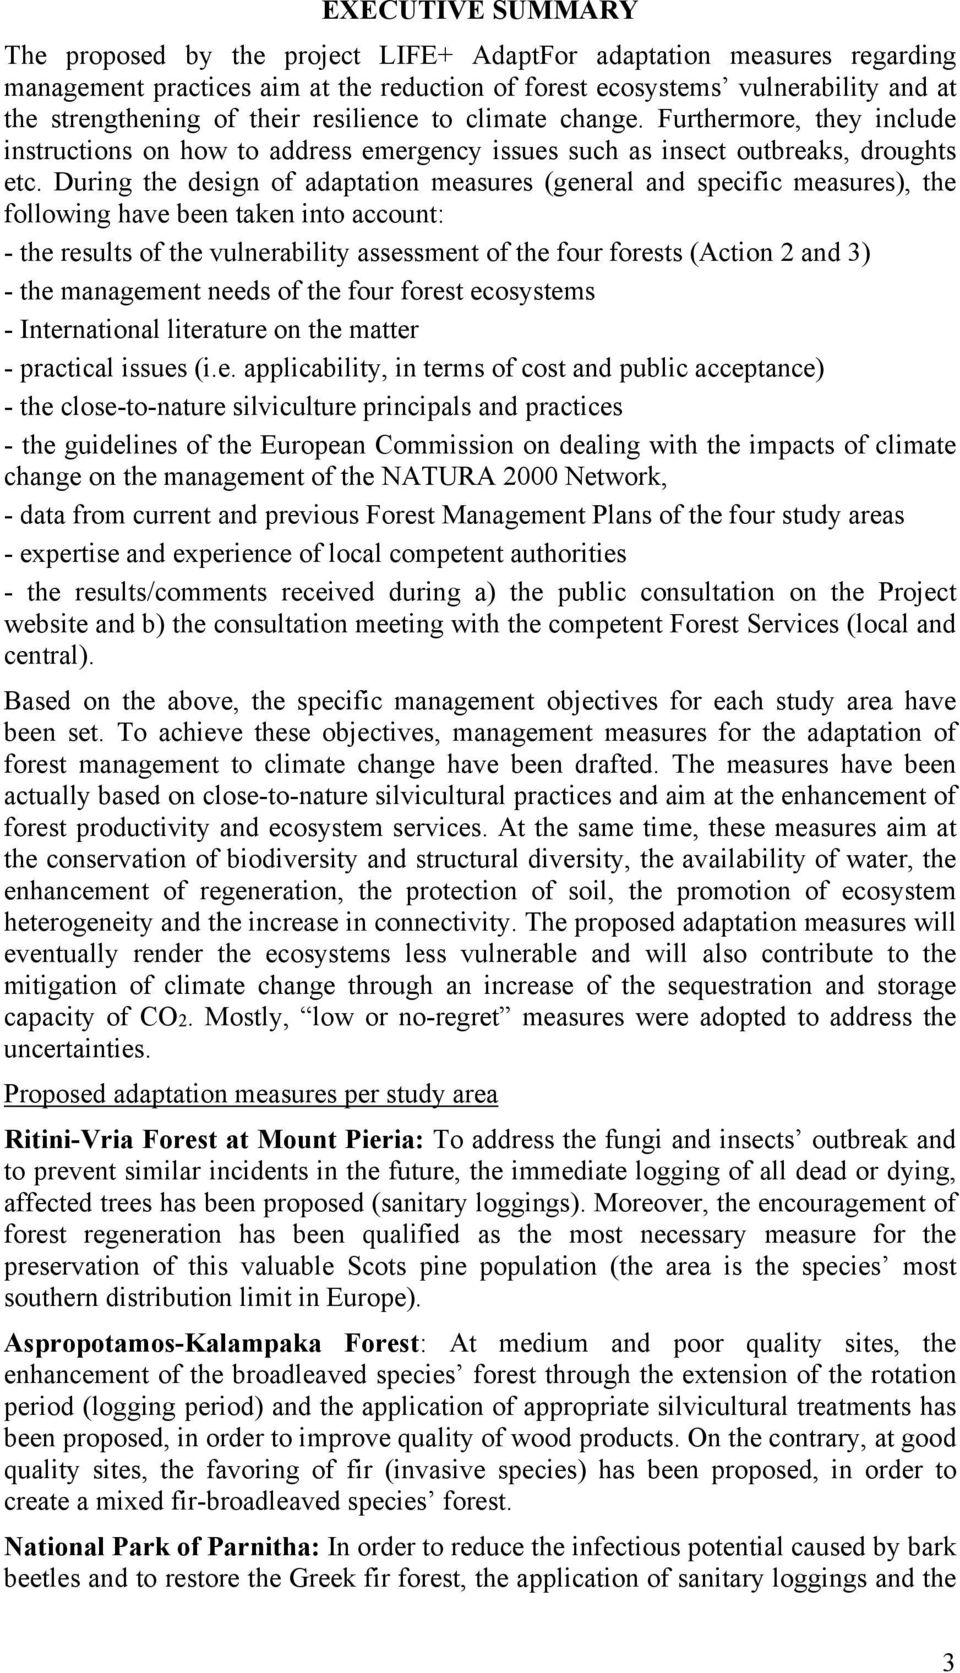 During the design of adaptation measures (general and specific measures), the following have been taken into account: - the results of the vulnerability assessment of the four forests (Action 2 and